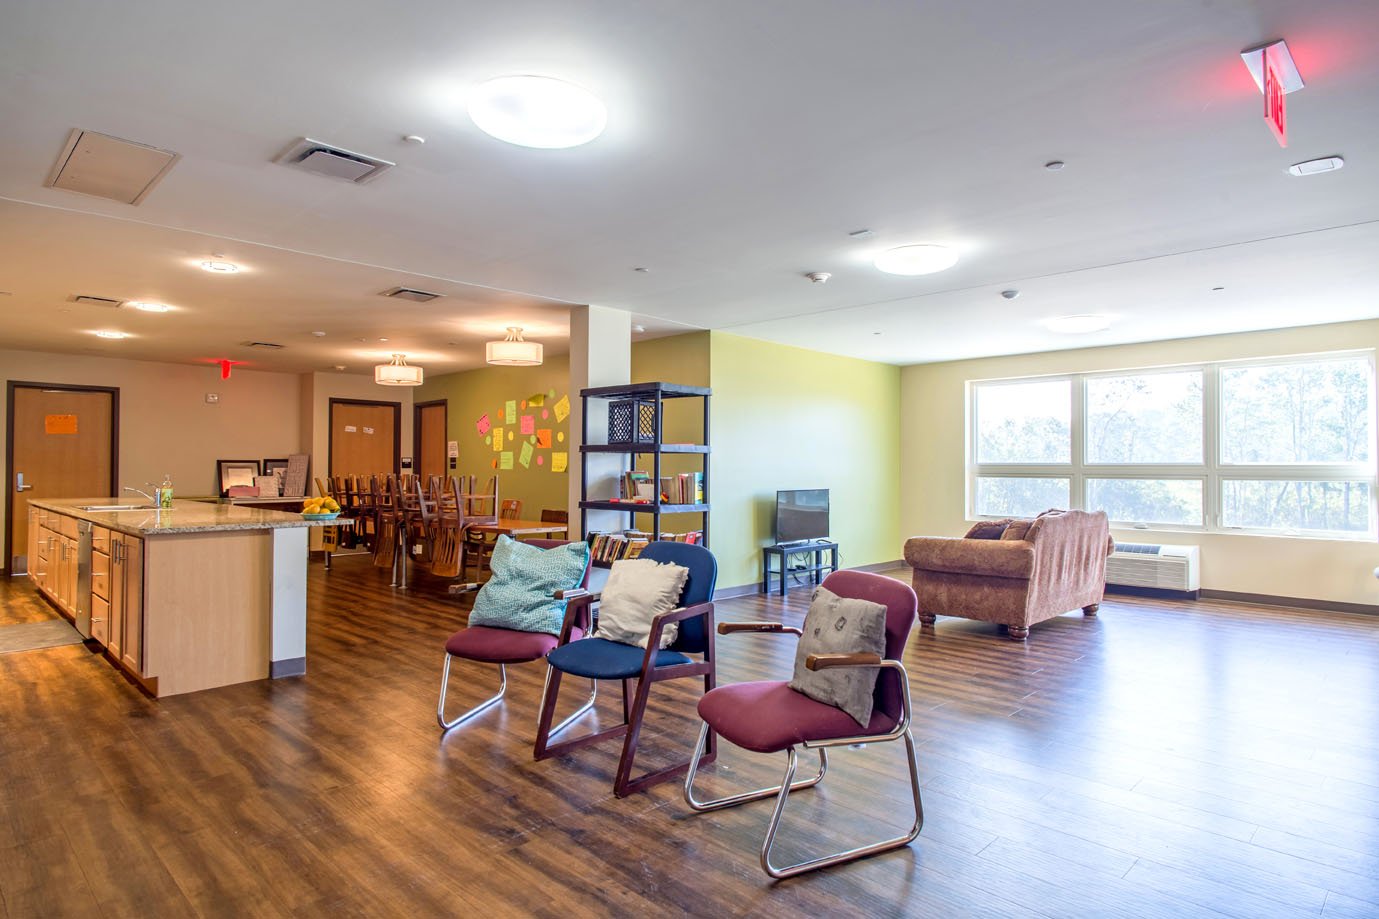 Suite-style pods encircle shared living quarters that offer a communal space for the THRIVE students to eat, study and relax after the classrooms are closed. Photo by Frank McMains.